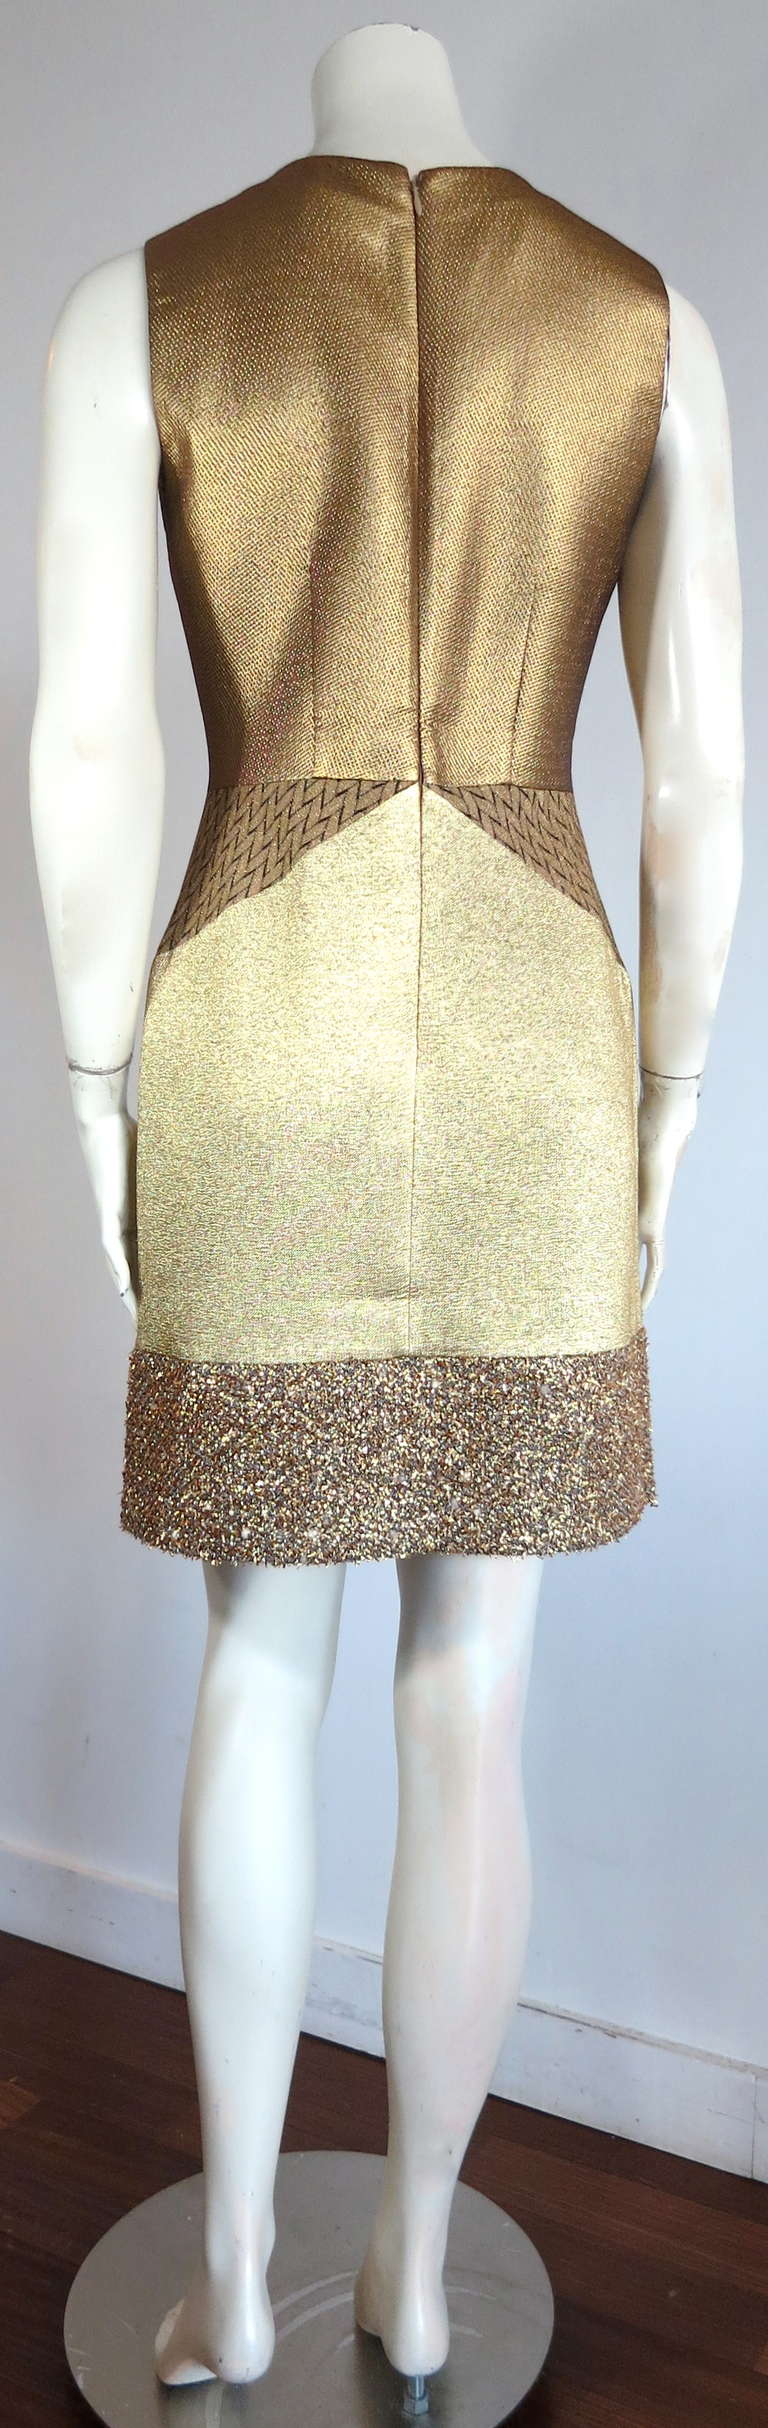 New MISSONI ITALY Metallic gold patchwork cocktail dress 3